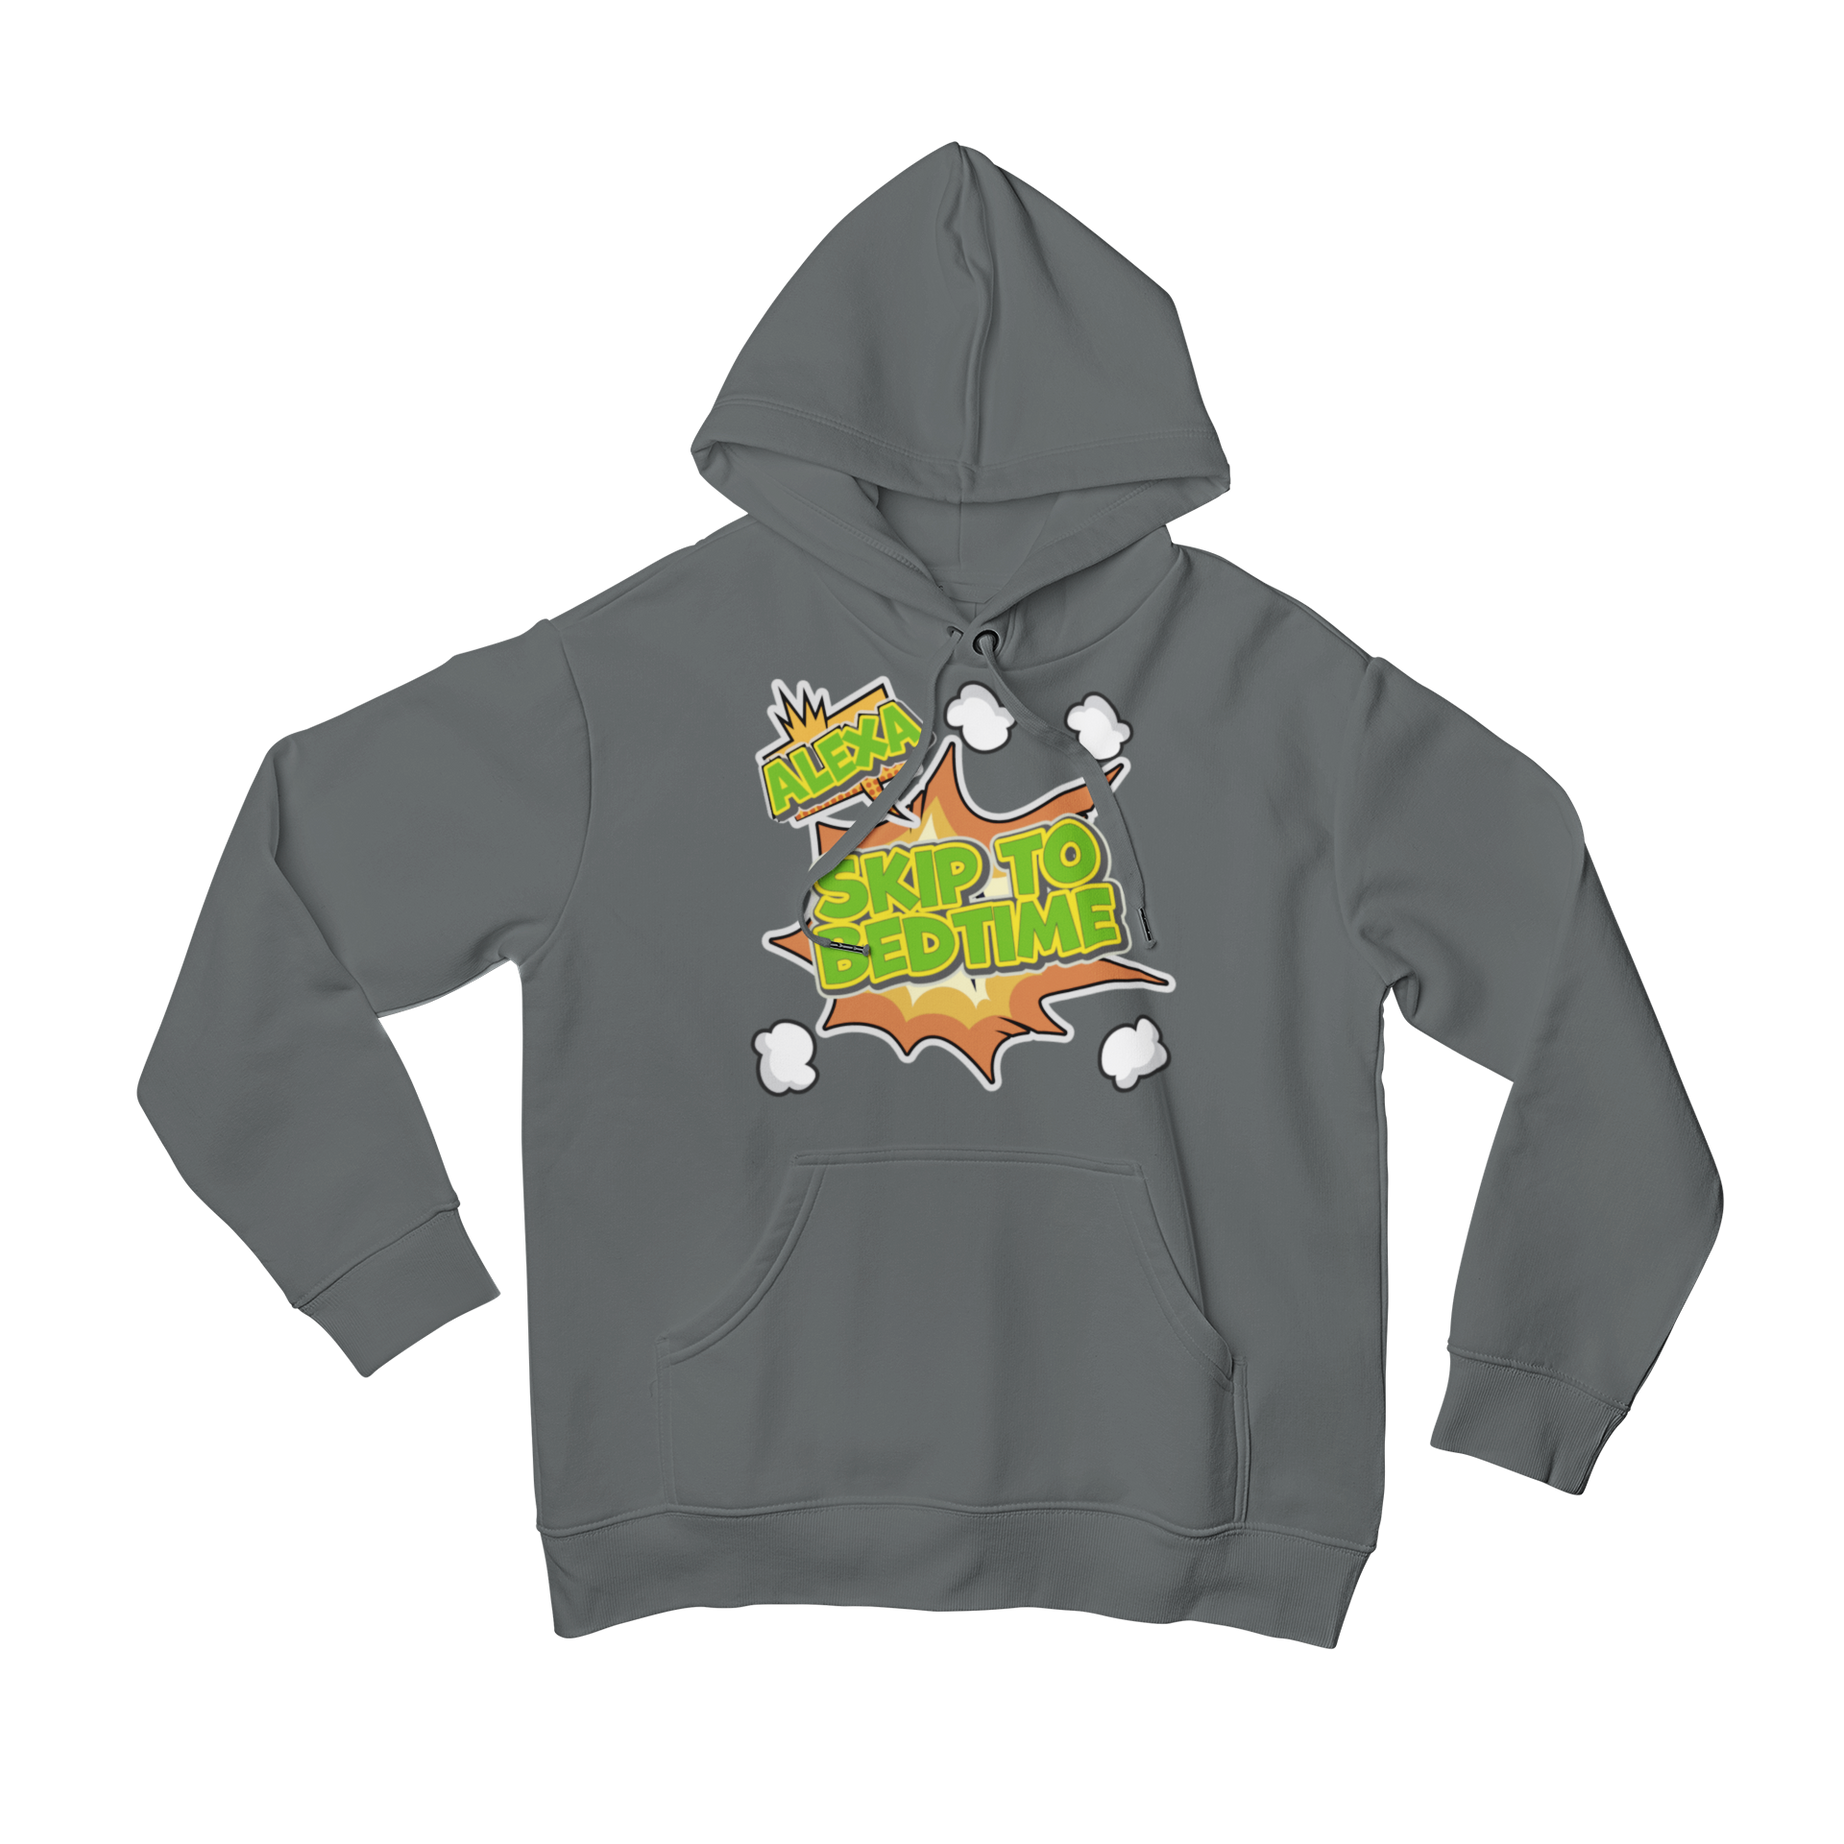 Teevolution's "Alexa, skip to bedtime hoodie" is the perfect addition to your wardrobe. This comfy hoodie is perfect for lazy weekends or a night in. Get yours today and see why everyone is raving about it!